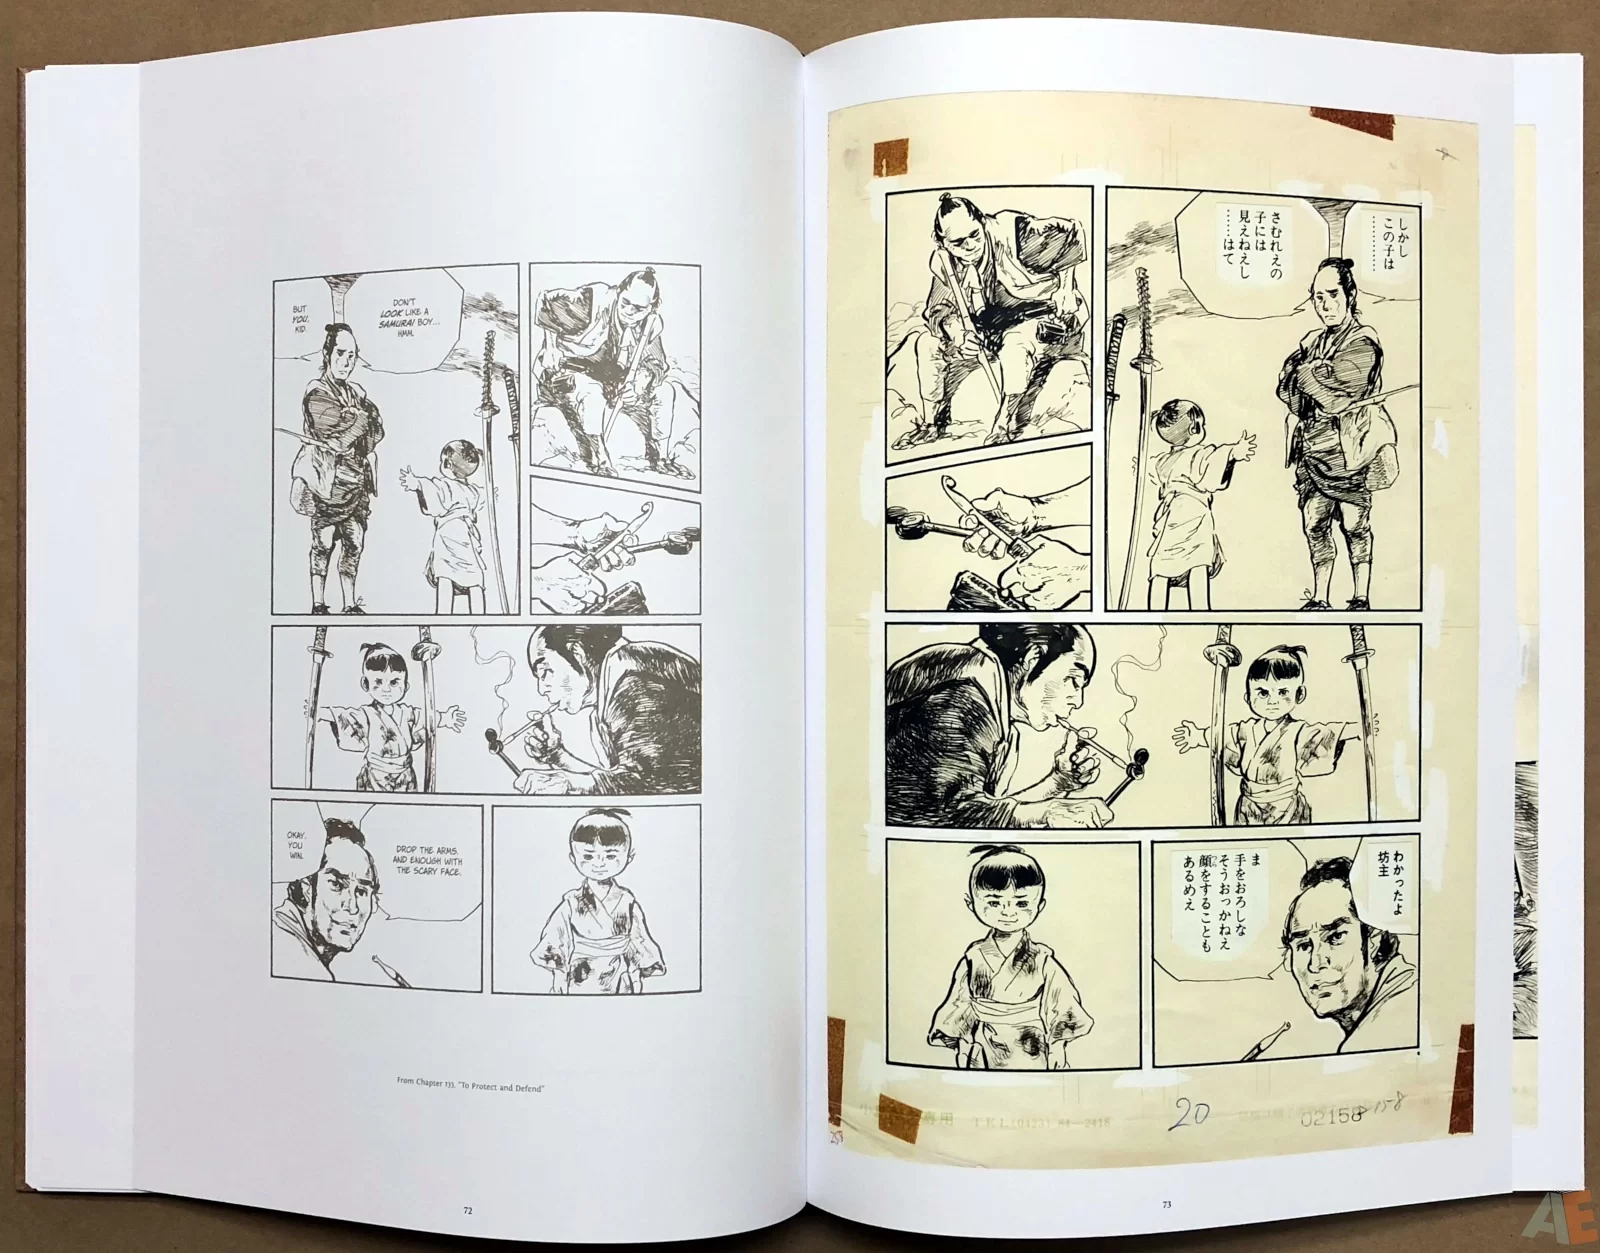 Lone Wolf and Cub Gallery Edition